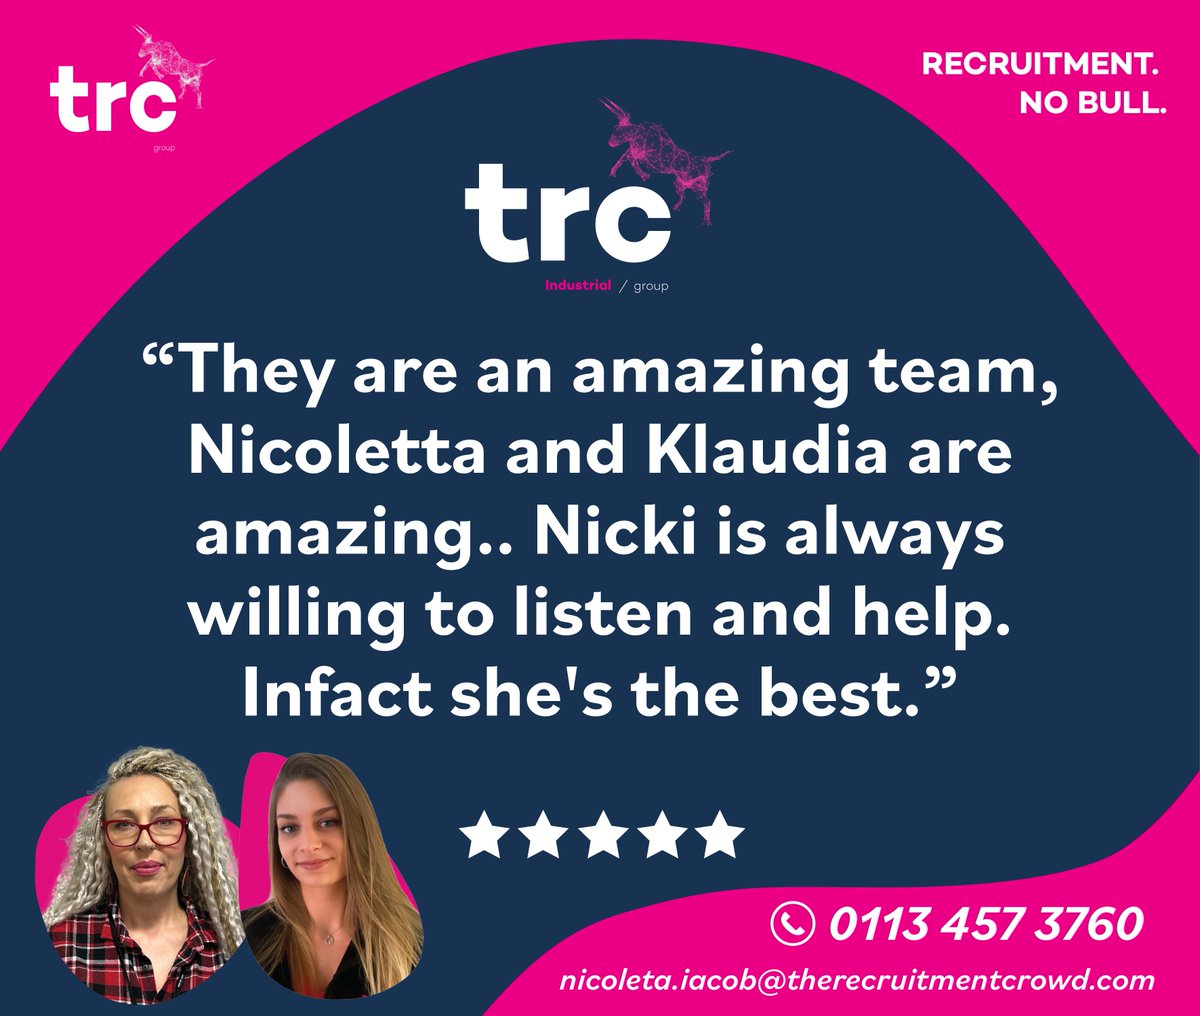 ✅ Another lovely review from one of our candidates 😍 Well done ladies! We want to hear your reviews! Head over to g.page/r/CTgjIvWbTXpT… and let us know how we're doing 😁 #CareerGoals #JobSearch #DreamJob #trcgroup #nobull #therecruitmentcrowd